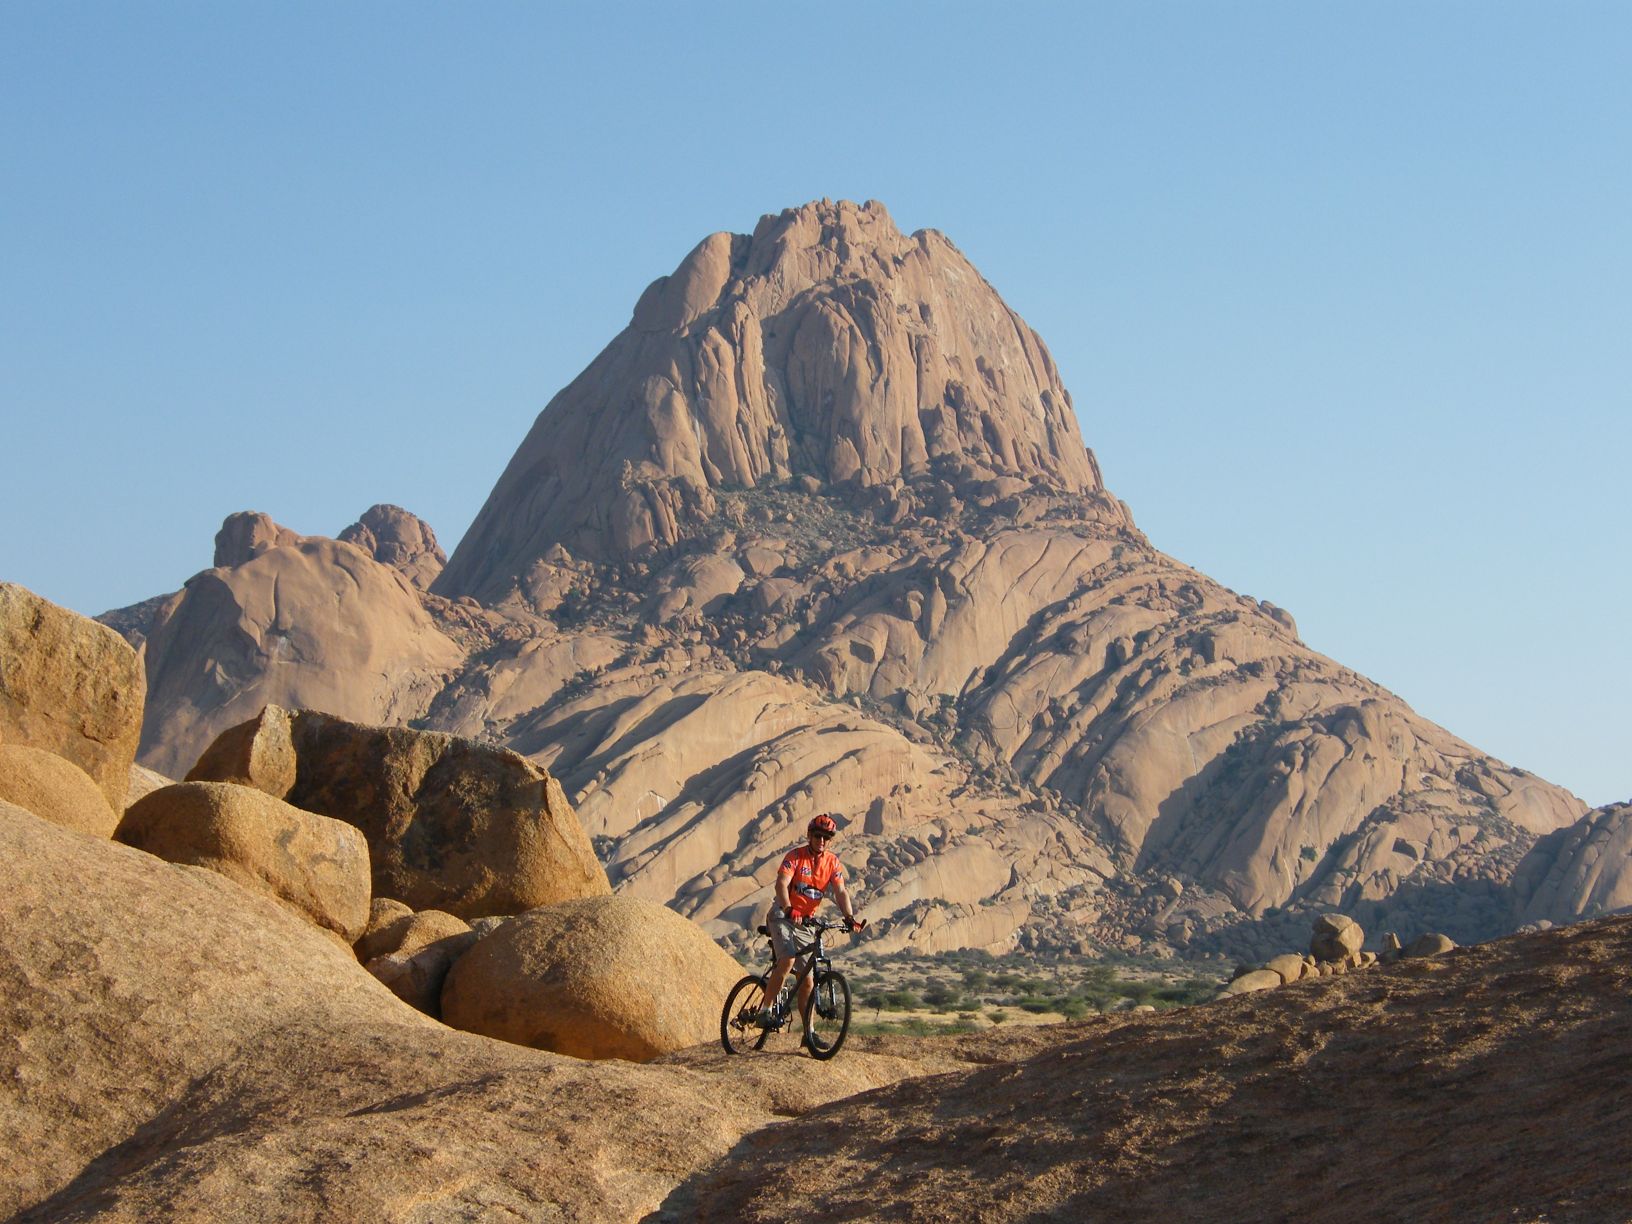 A cyclist on the Spitzkoppe, the "Matterhorn of Namibia"